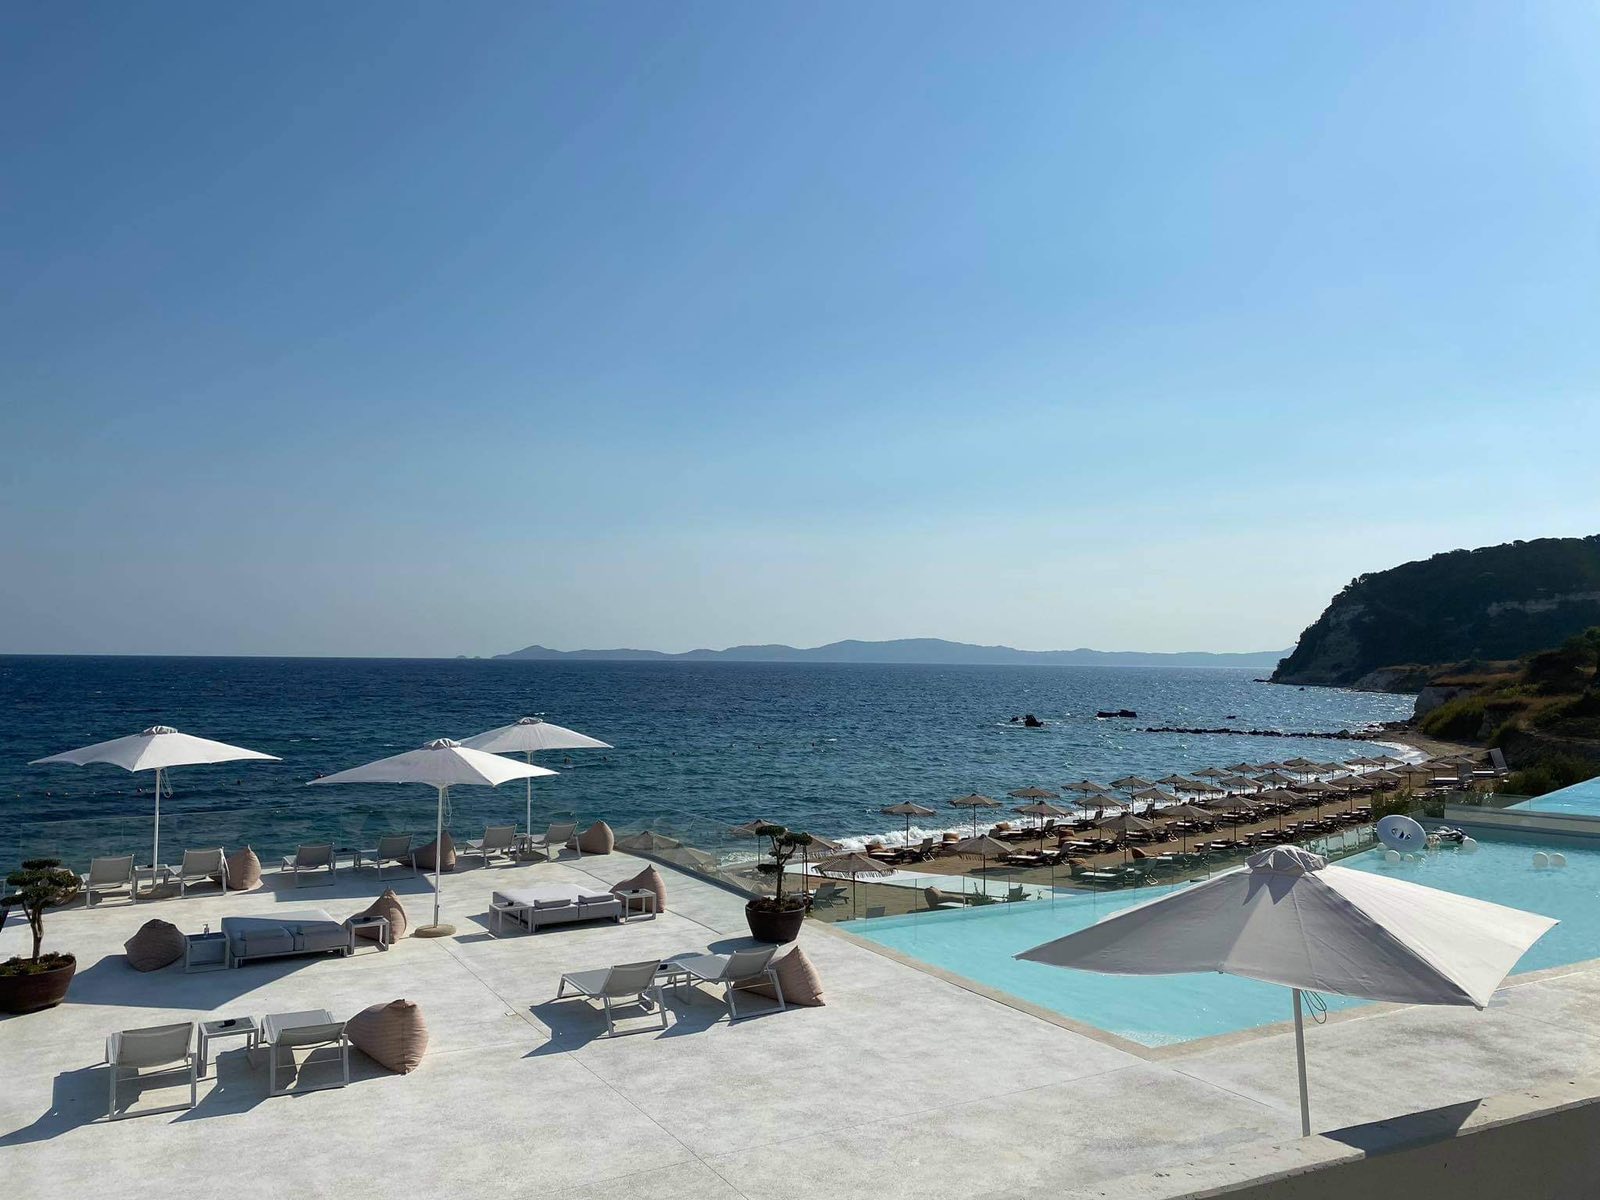 Photo of Athos Hotel Beach with gray sand surface